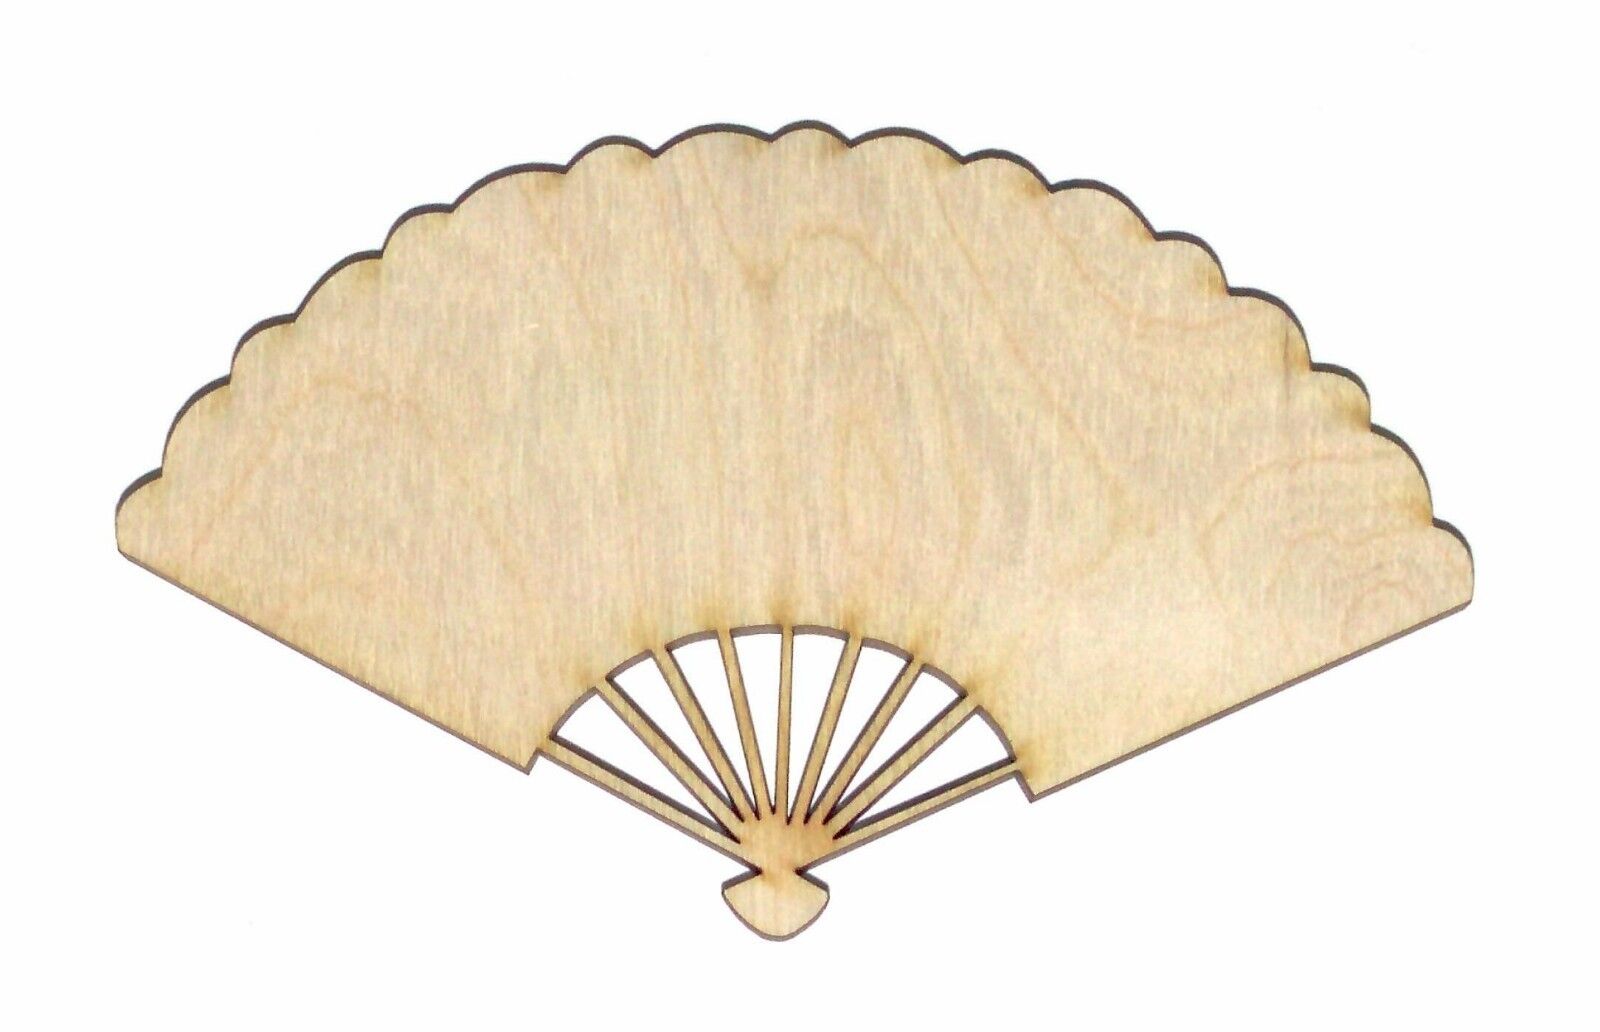 Desiree Fan Unfinished Wood Shape Cut Lindahl Out Soldering Max 78% OFF DF967 Crafts W